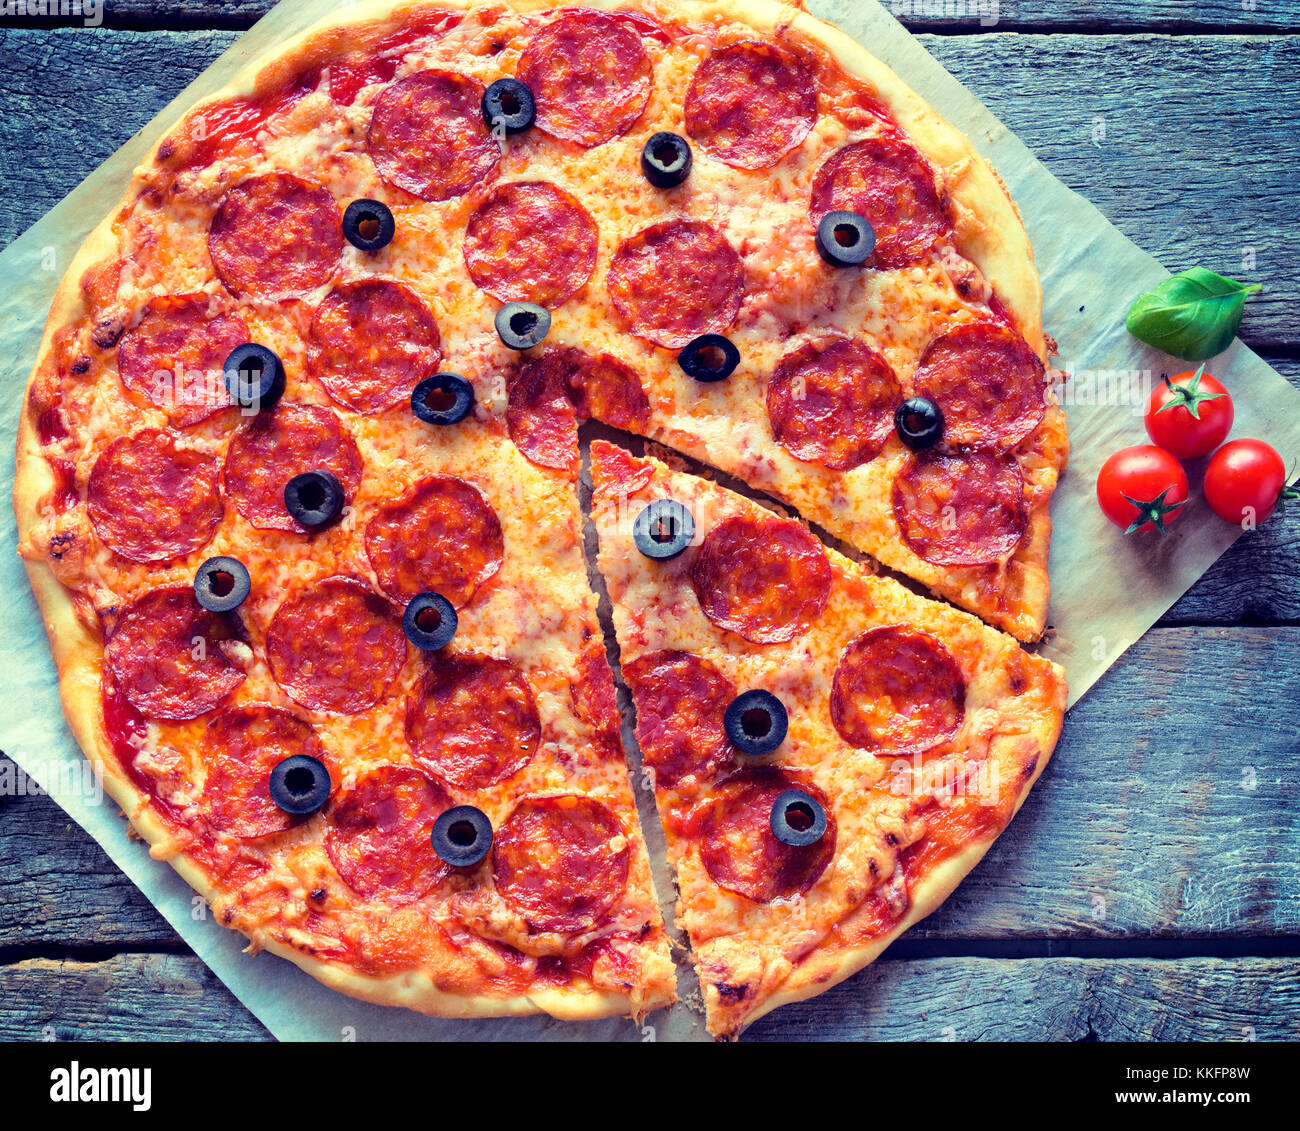 Homemade pepperoni pizza from above on the wooden background Stock Photo